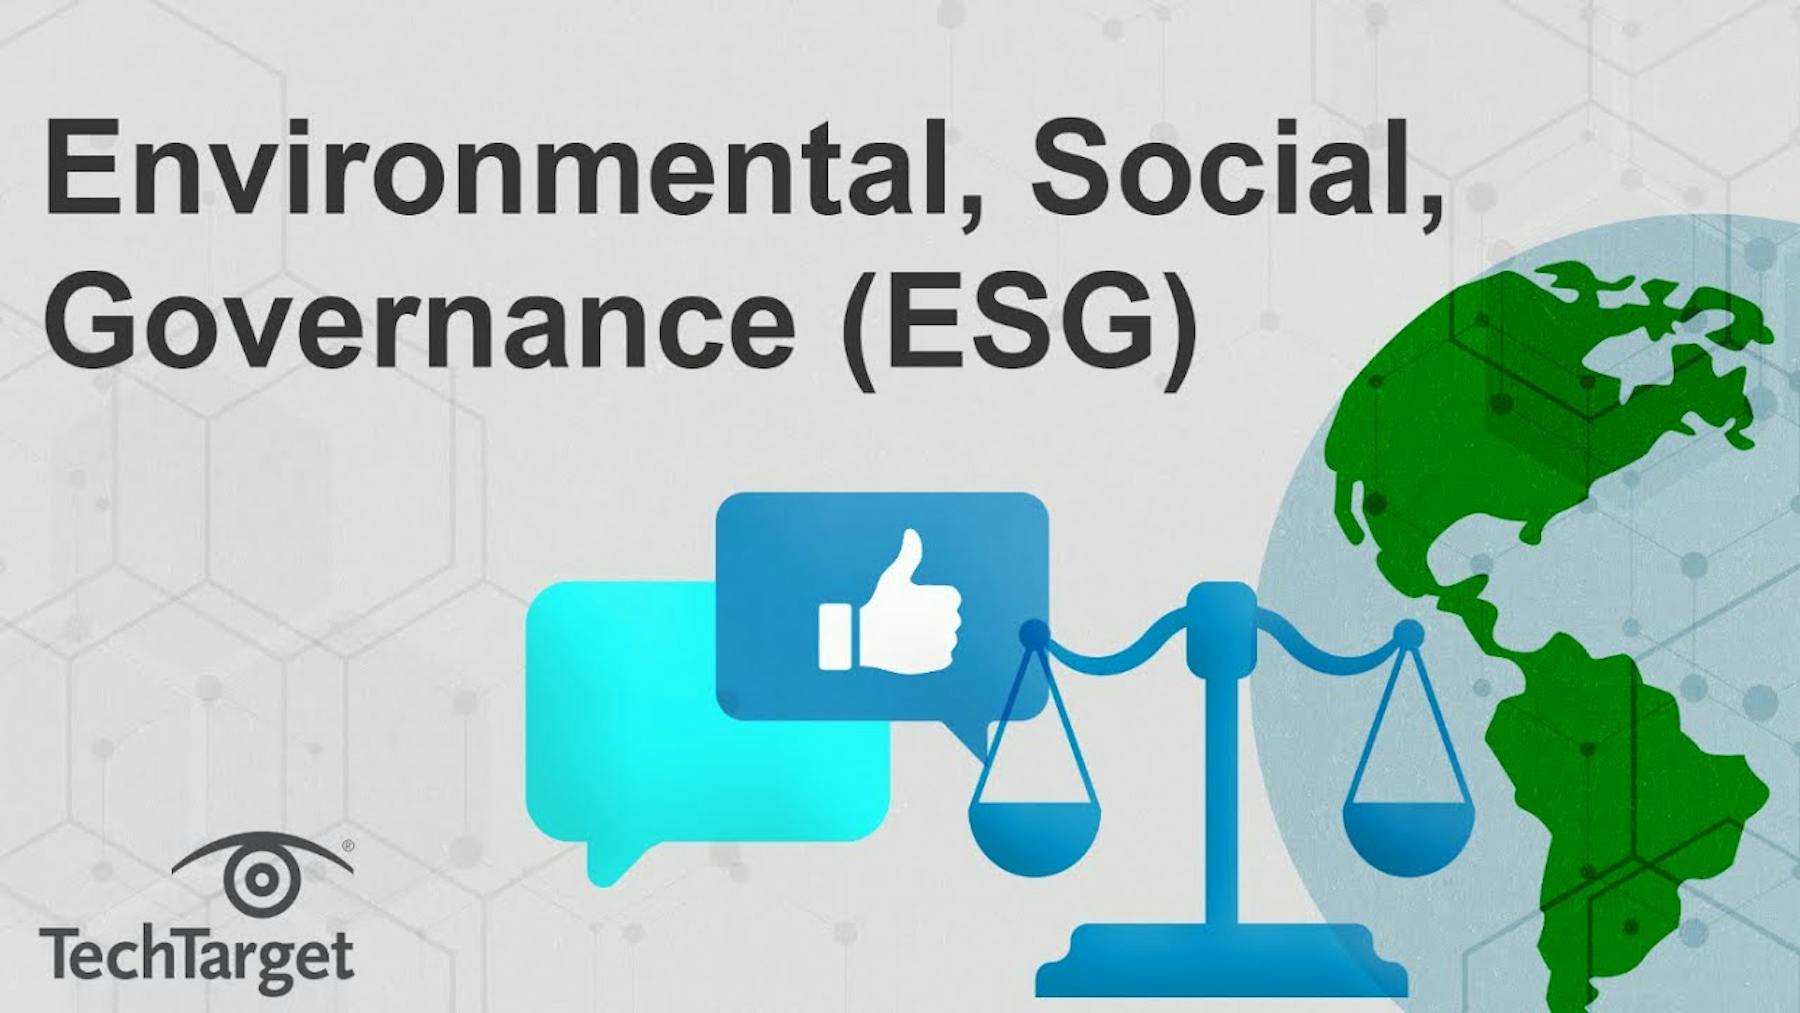 ESG Services, Technical Advisory, Fund Protection